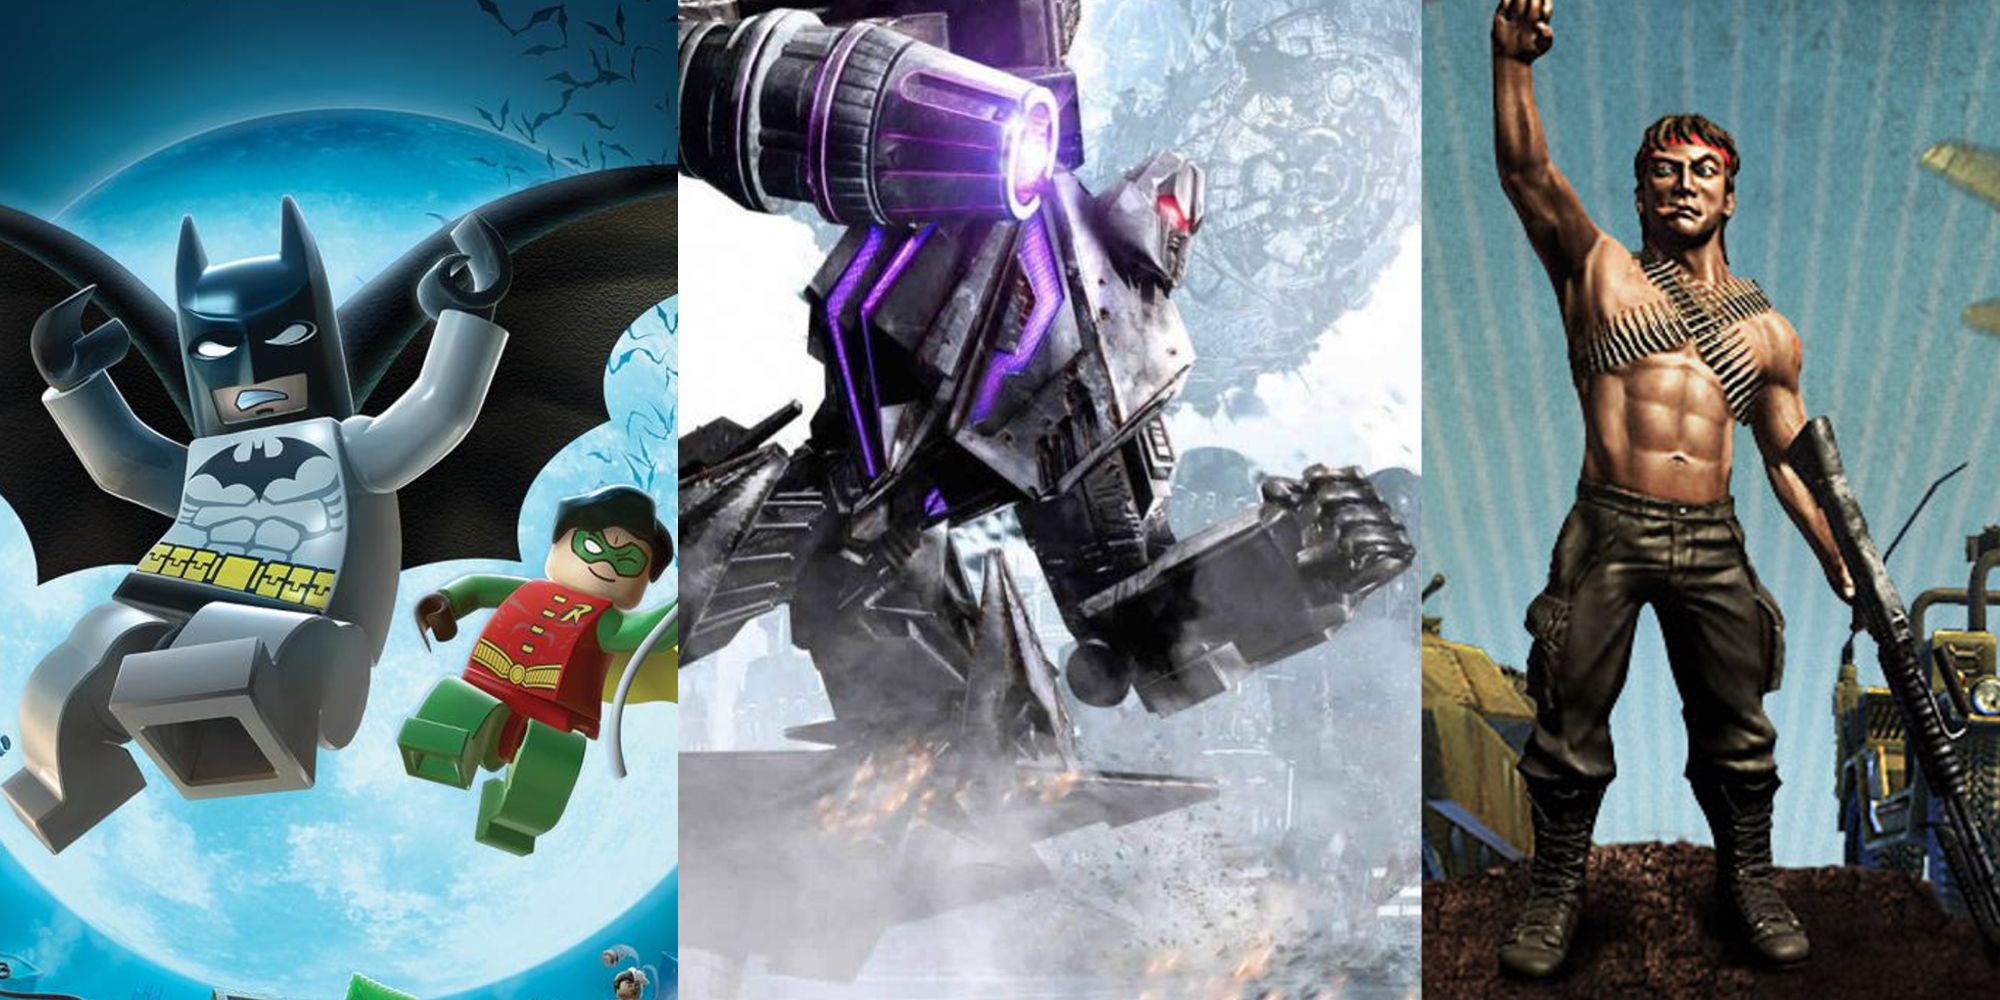 Split Image of Lego Batman: The Video Game, Transformers: War For Cybertron, and Toy Soldiers: Cold War